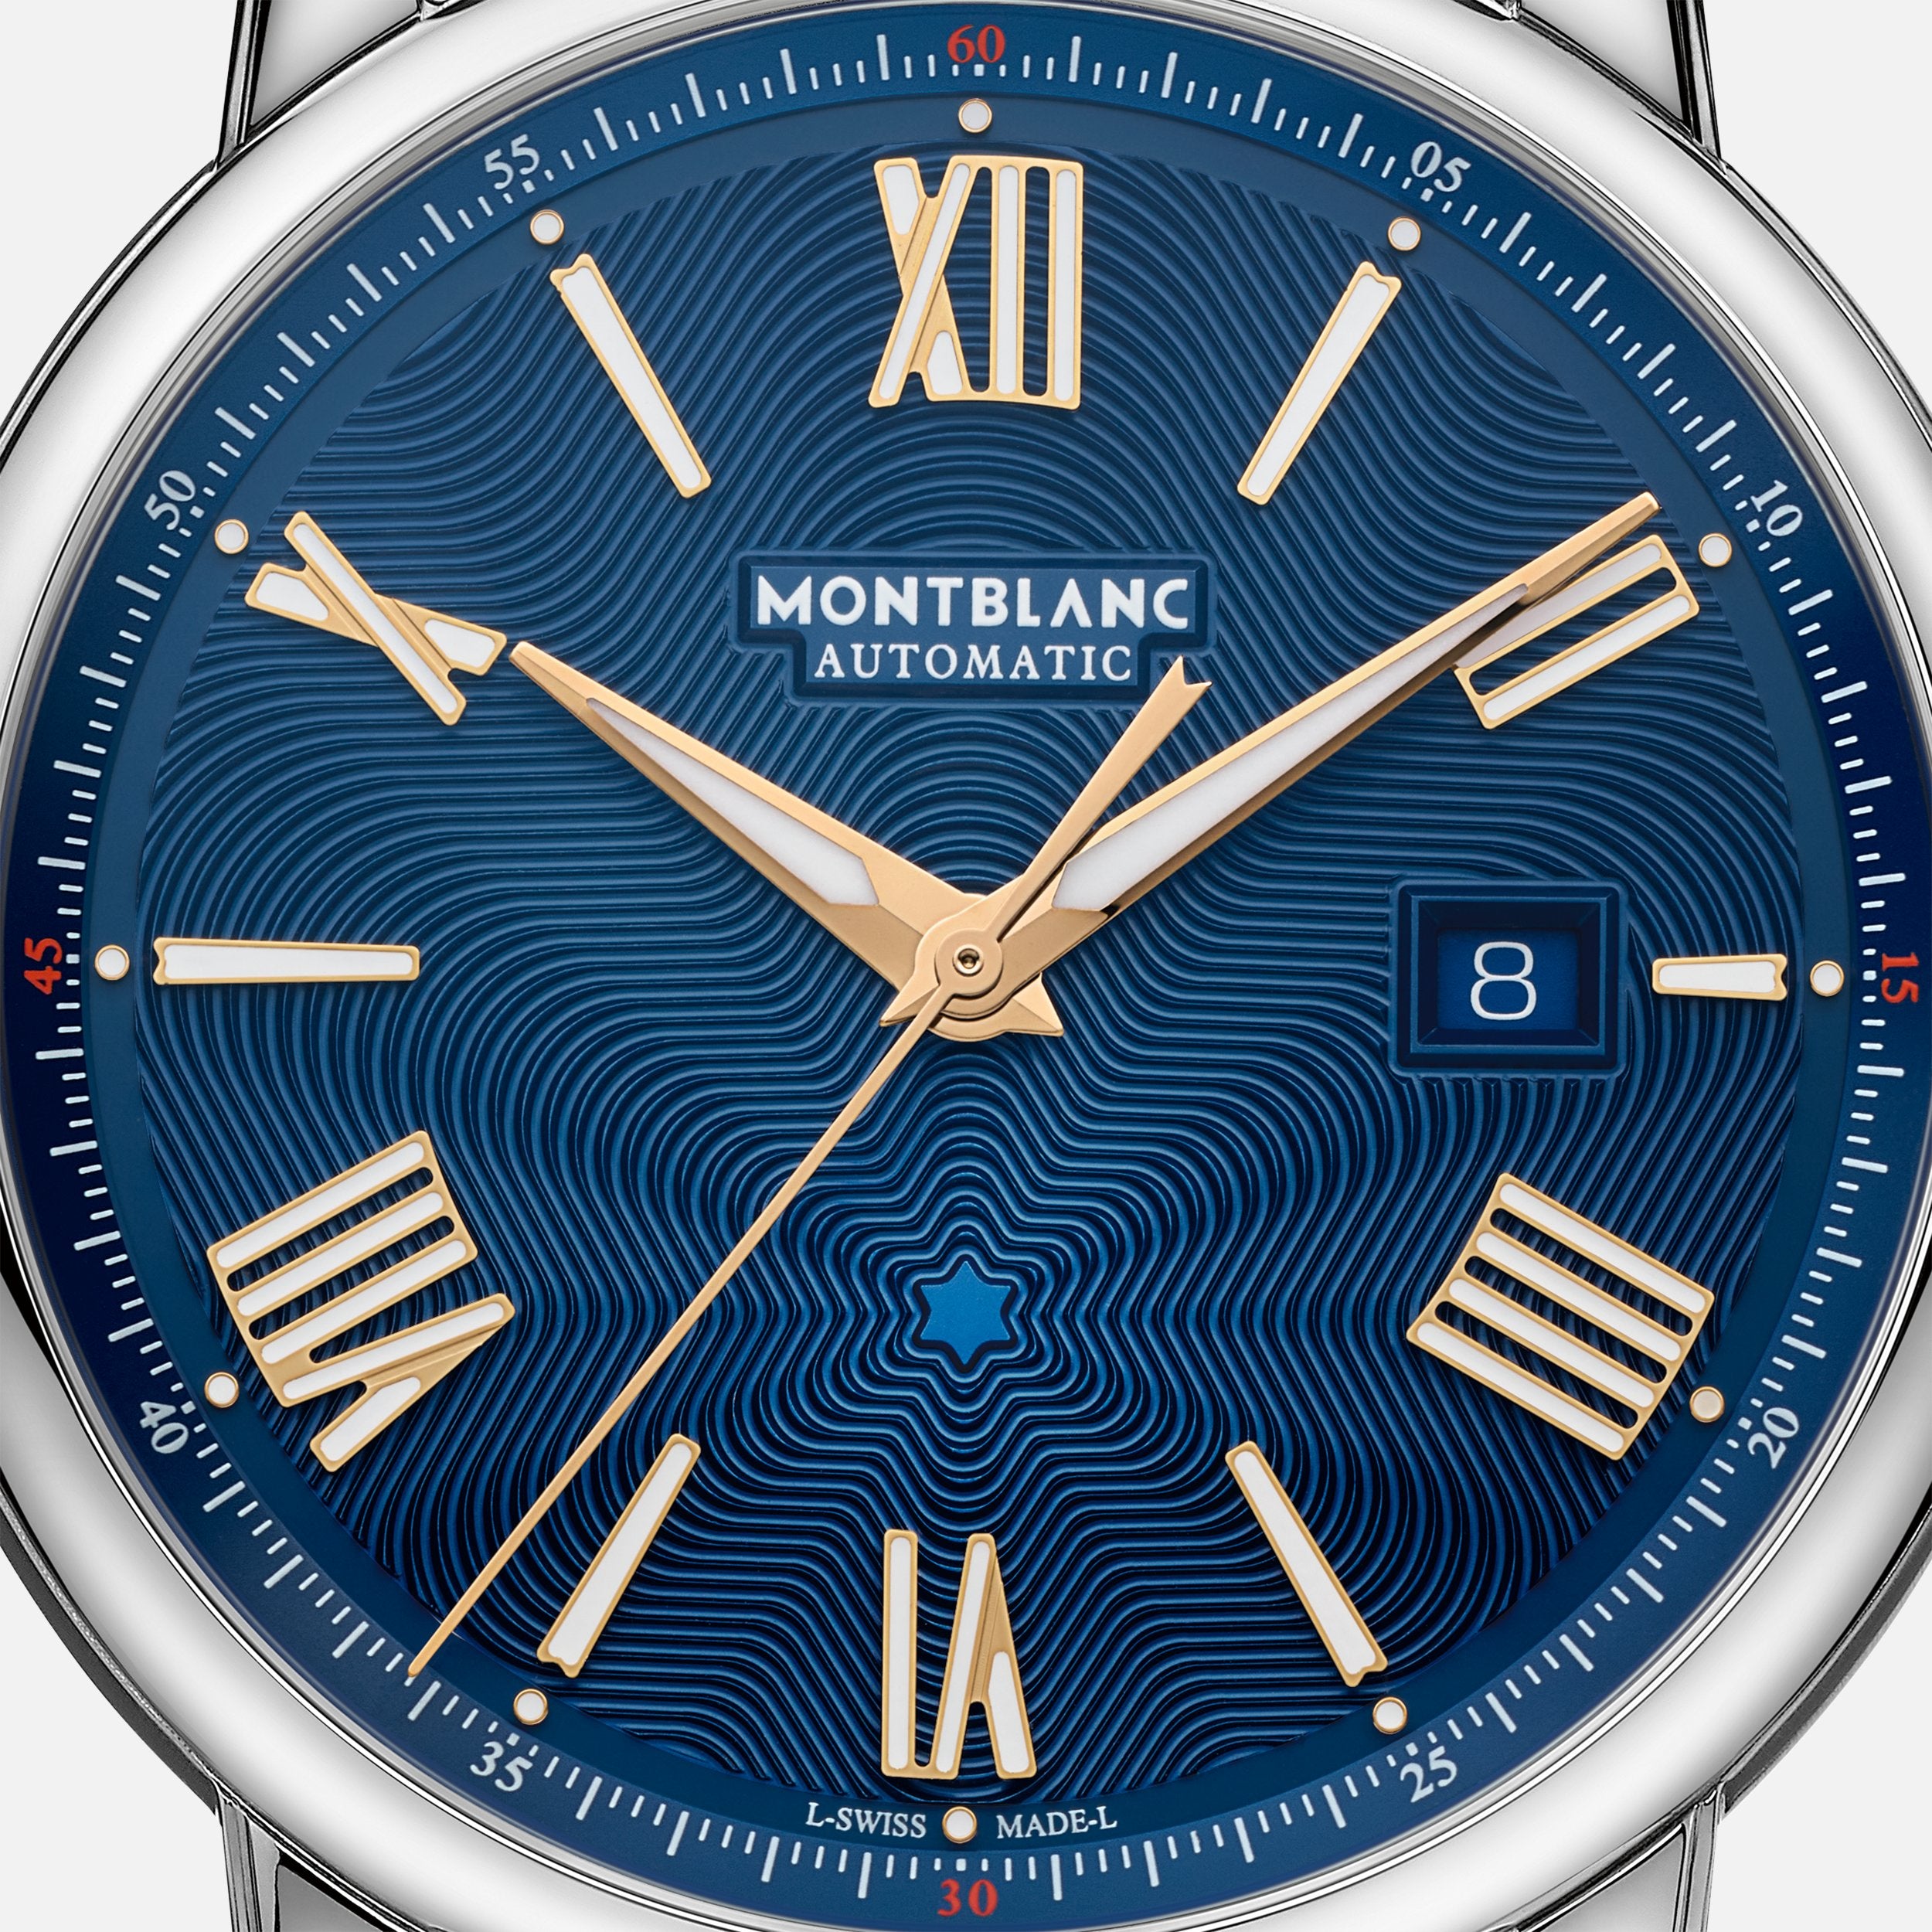 MONTBLANC STAR LEGACY AUTOMATIC DATE 43 MM LIMITED EDITION - 800 PIECES